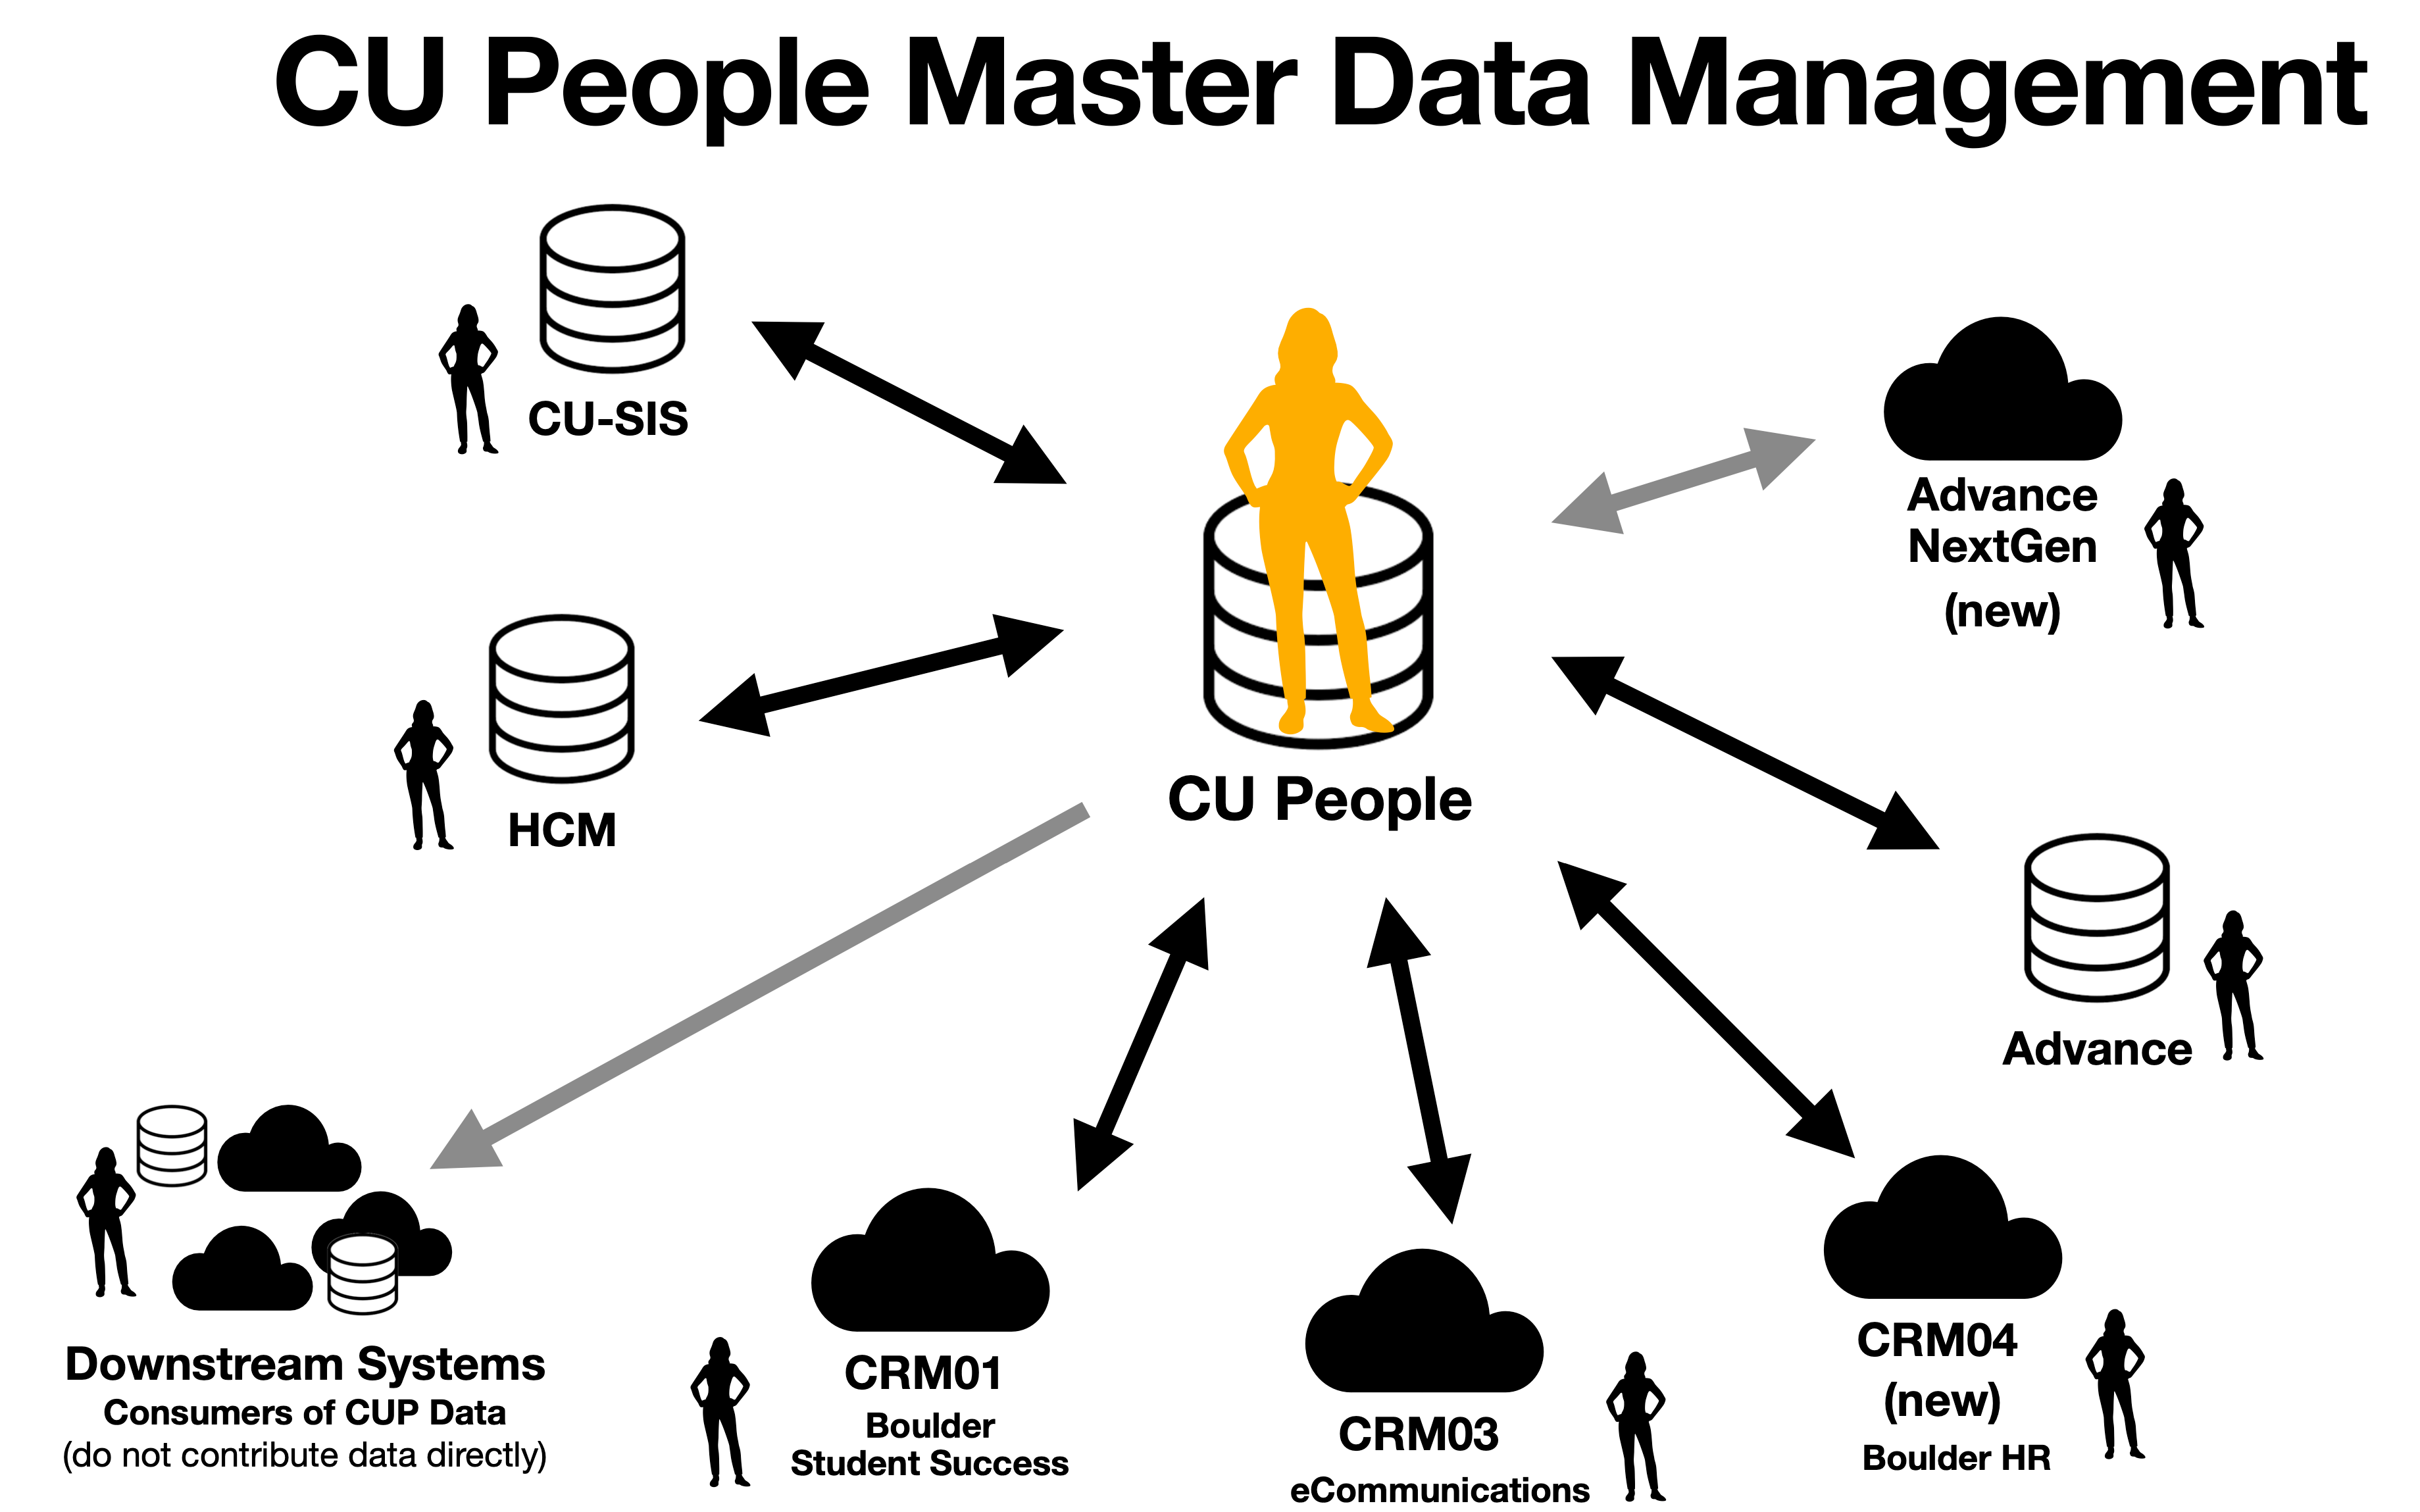 Diagram of CU People and how to interacts with other data storage areas